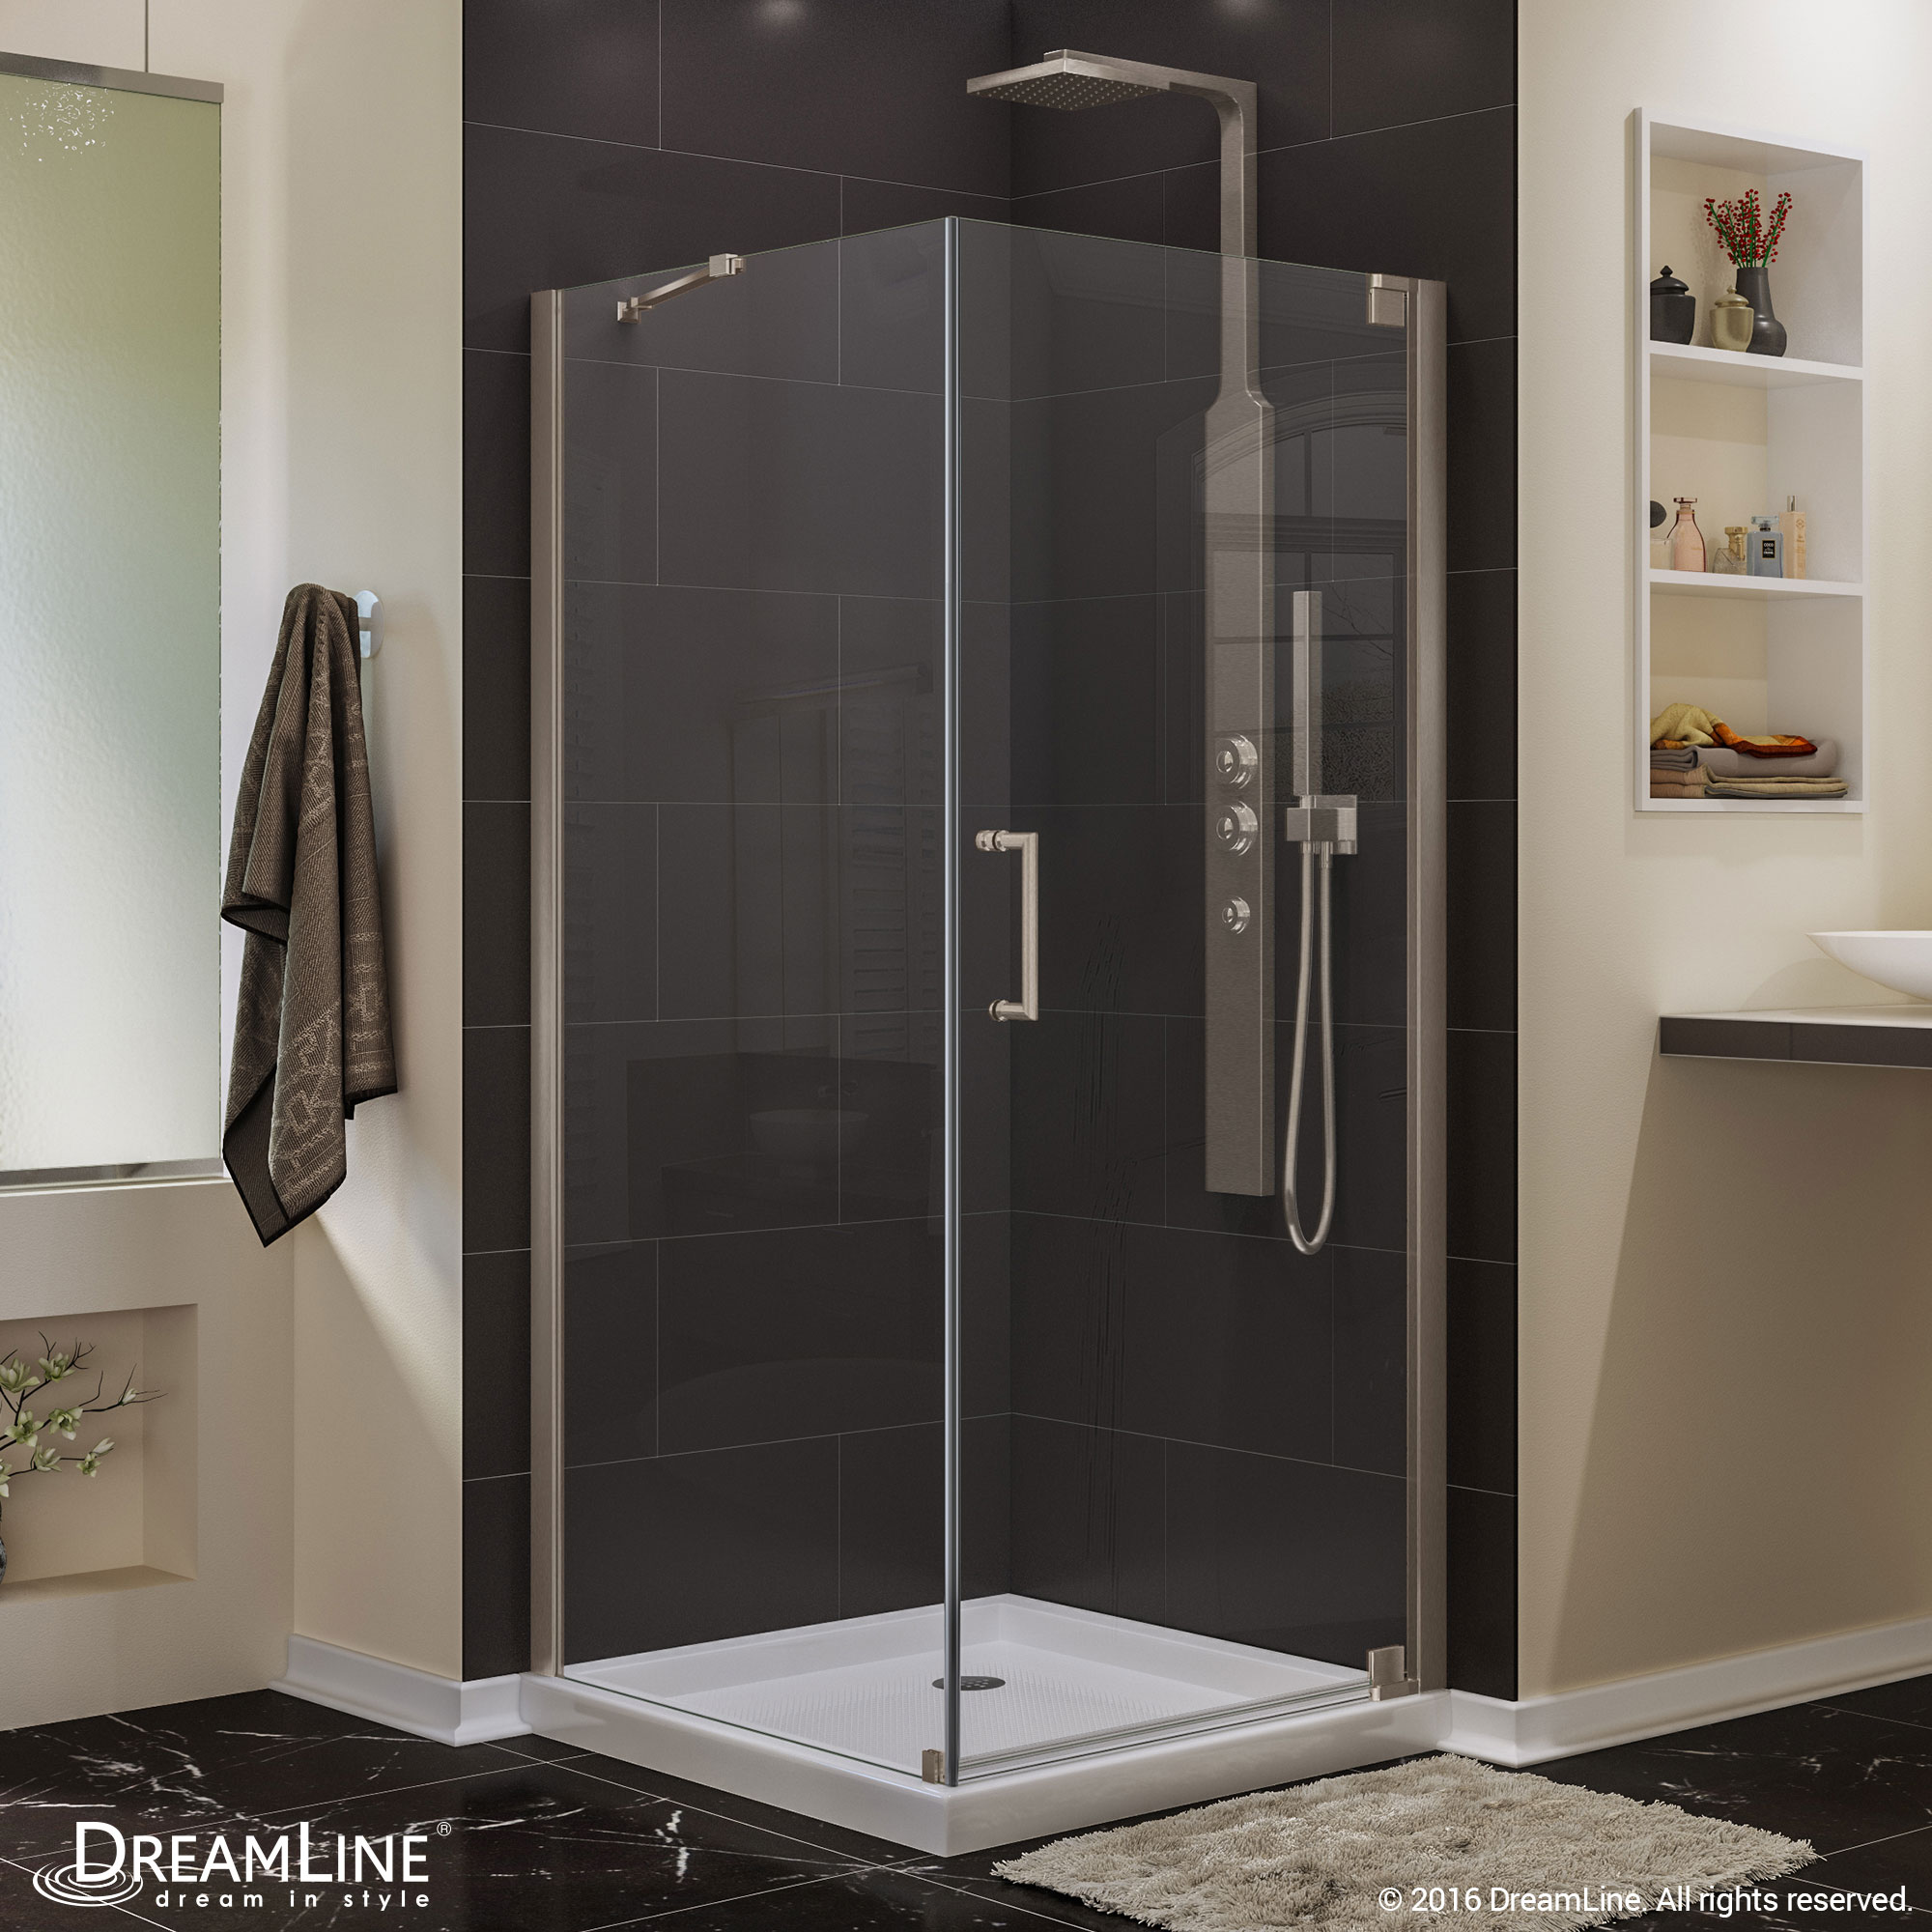 Elegance 34 to 36 in. W x 72 in. H Pivot Shower Door, Oil Rubbed Bronze Finish